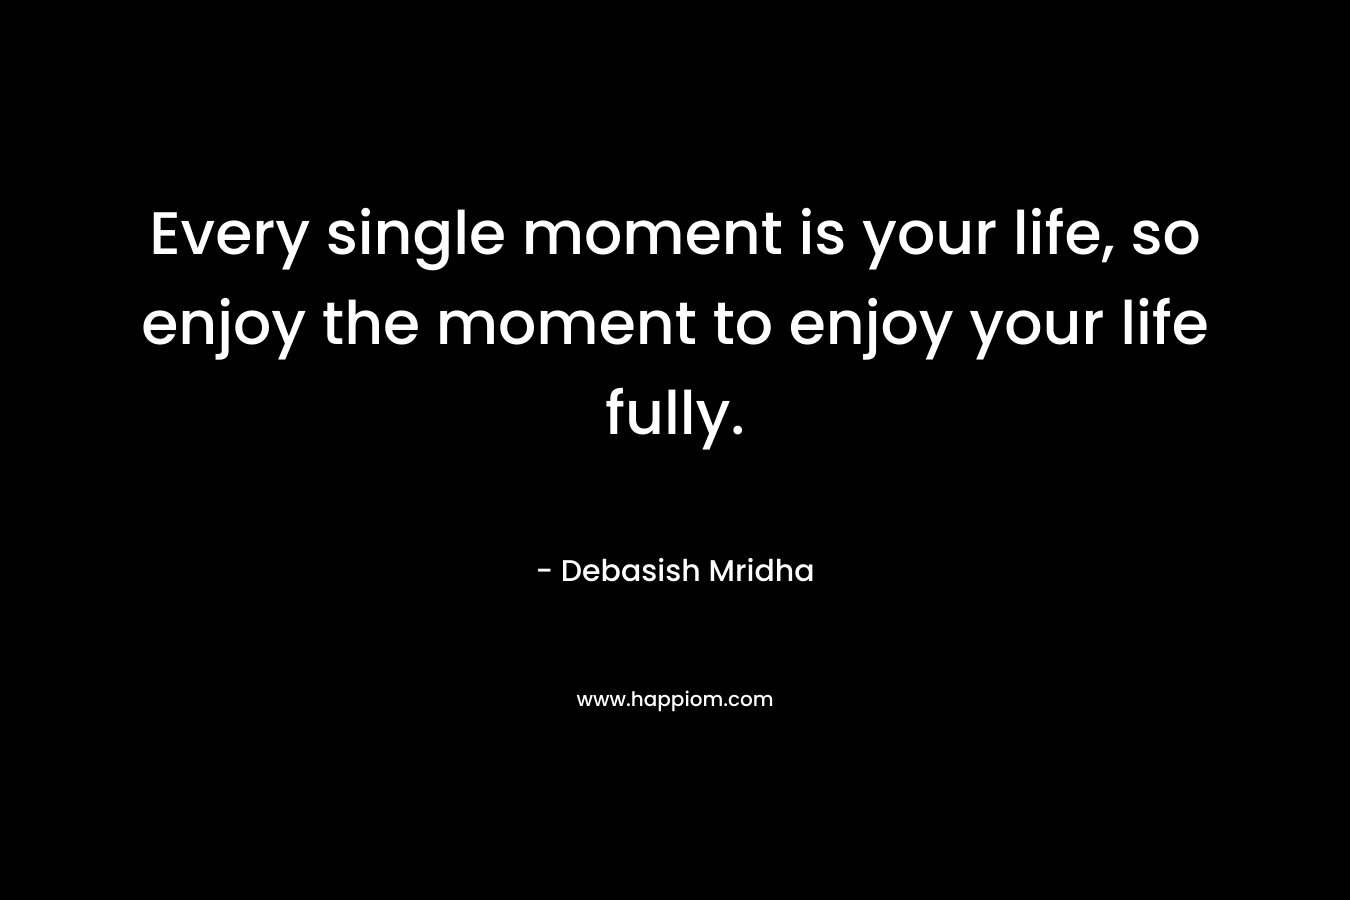 Every single moment is your life, so enjoy the moment to enjoy your life fully.